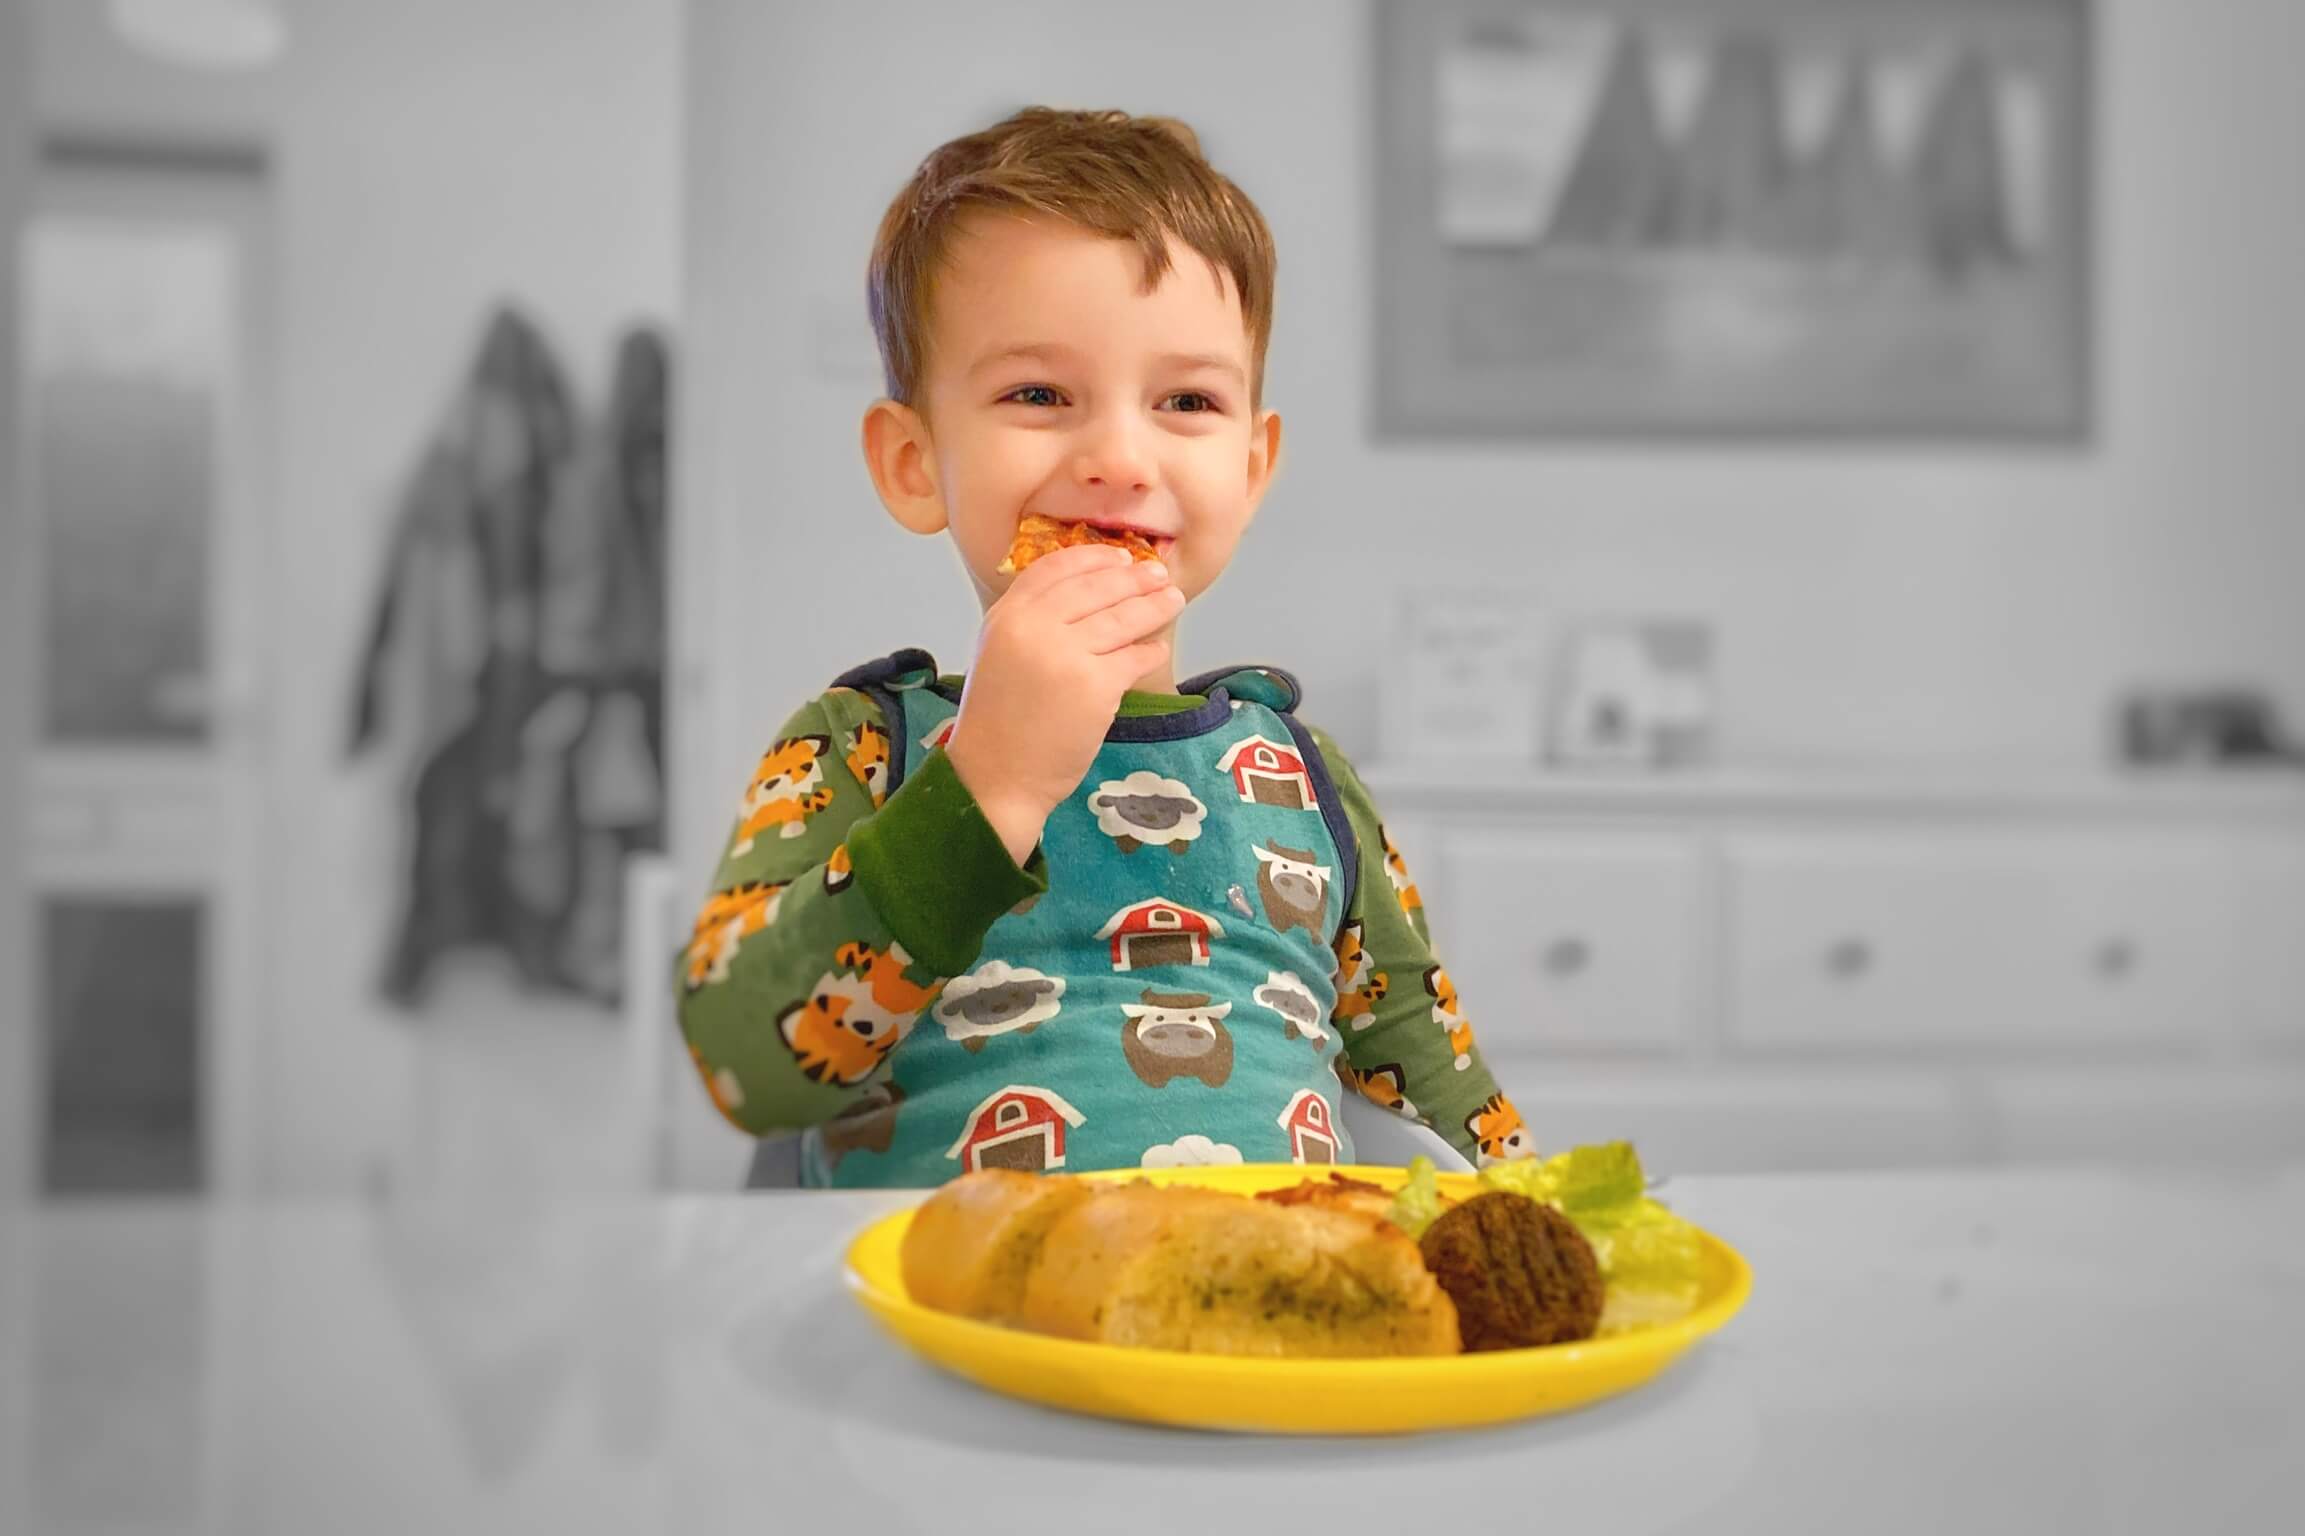 A happy toddler eating dinner at the table